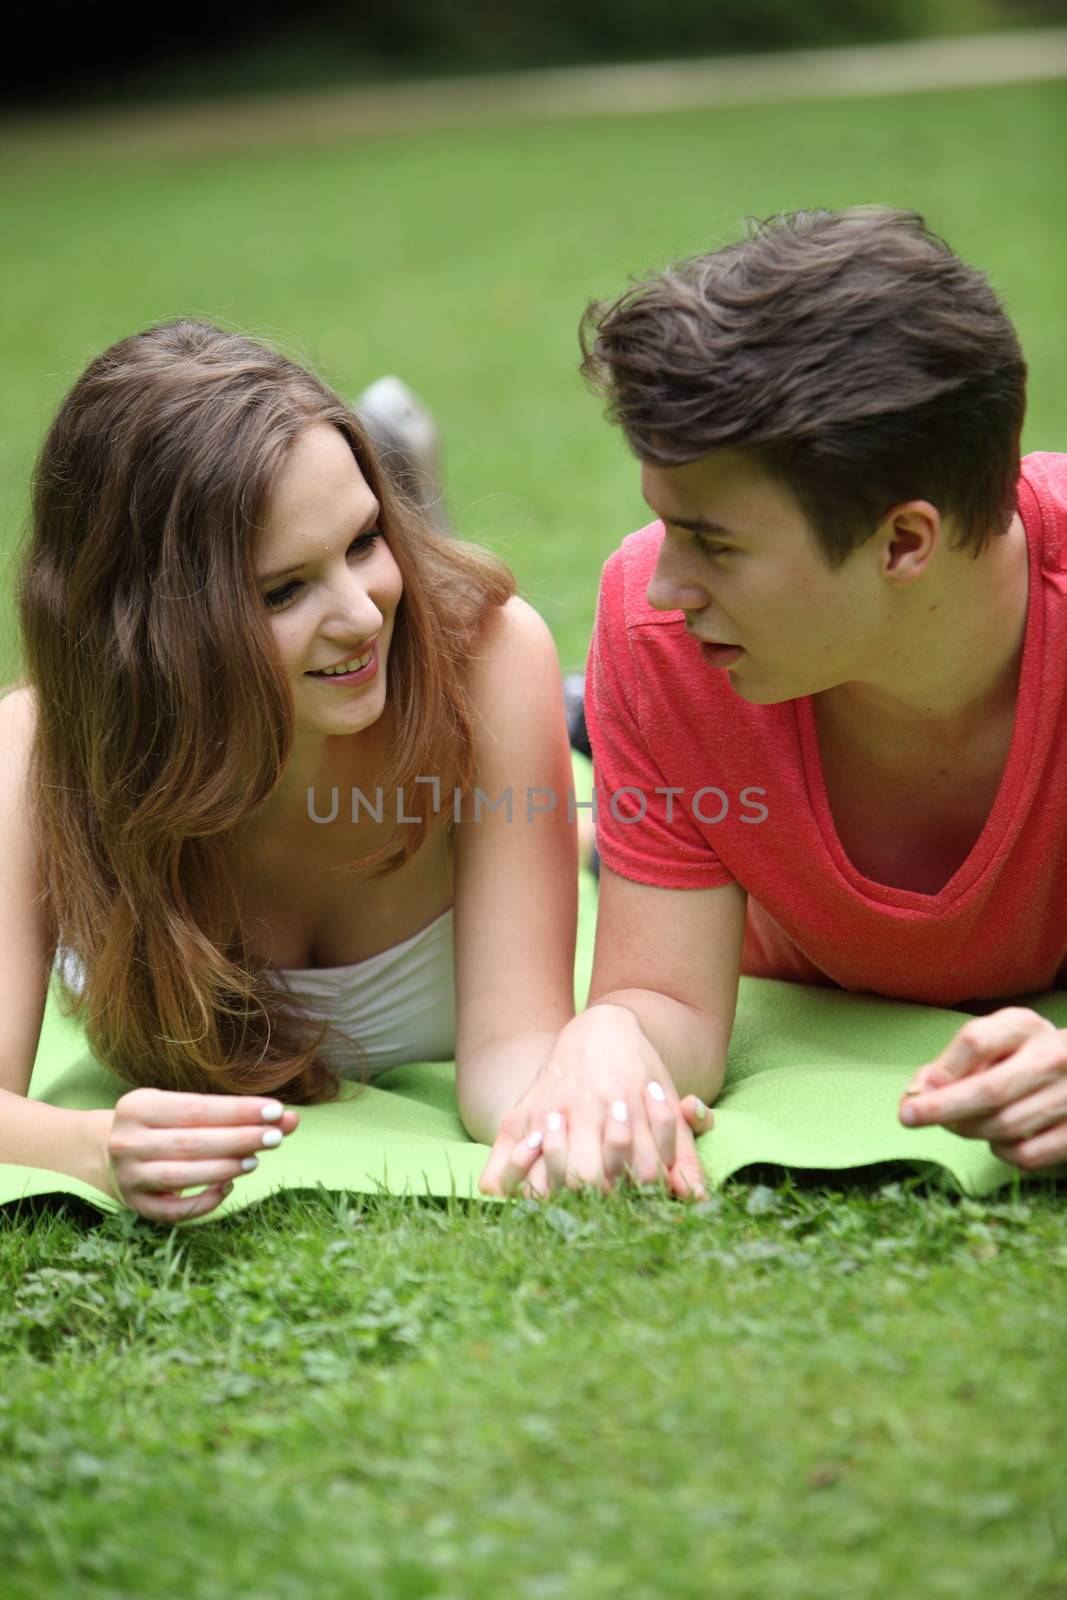 Assectionate teenage couple on a date lying holding hands on a rug in the park chatting and looking into each others eyes